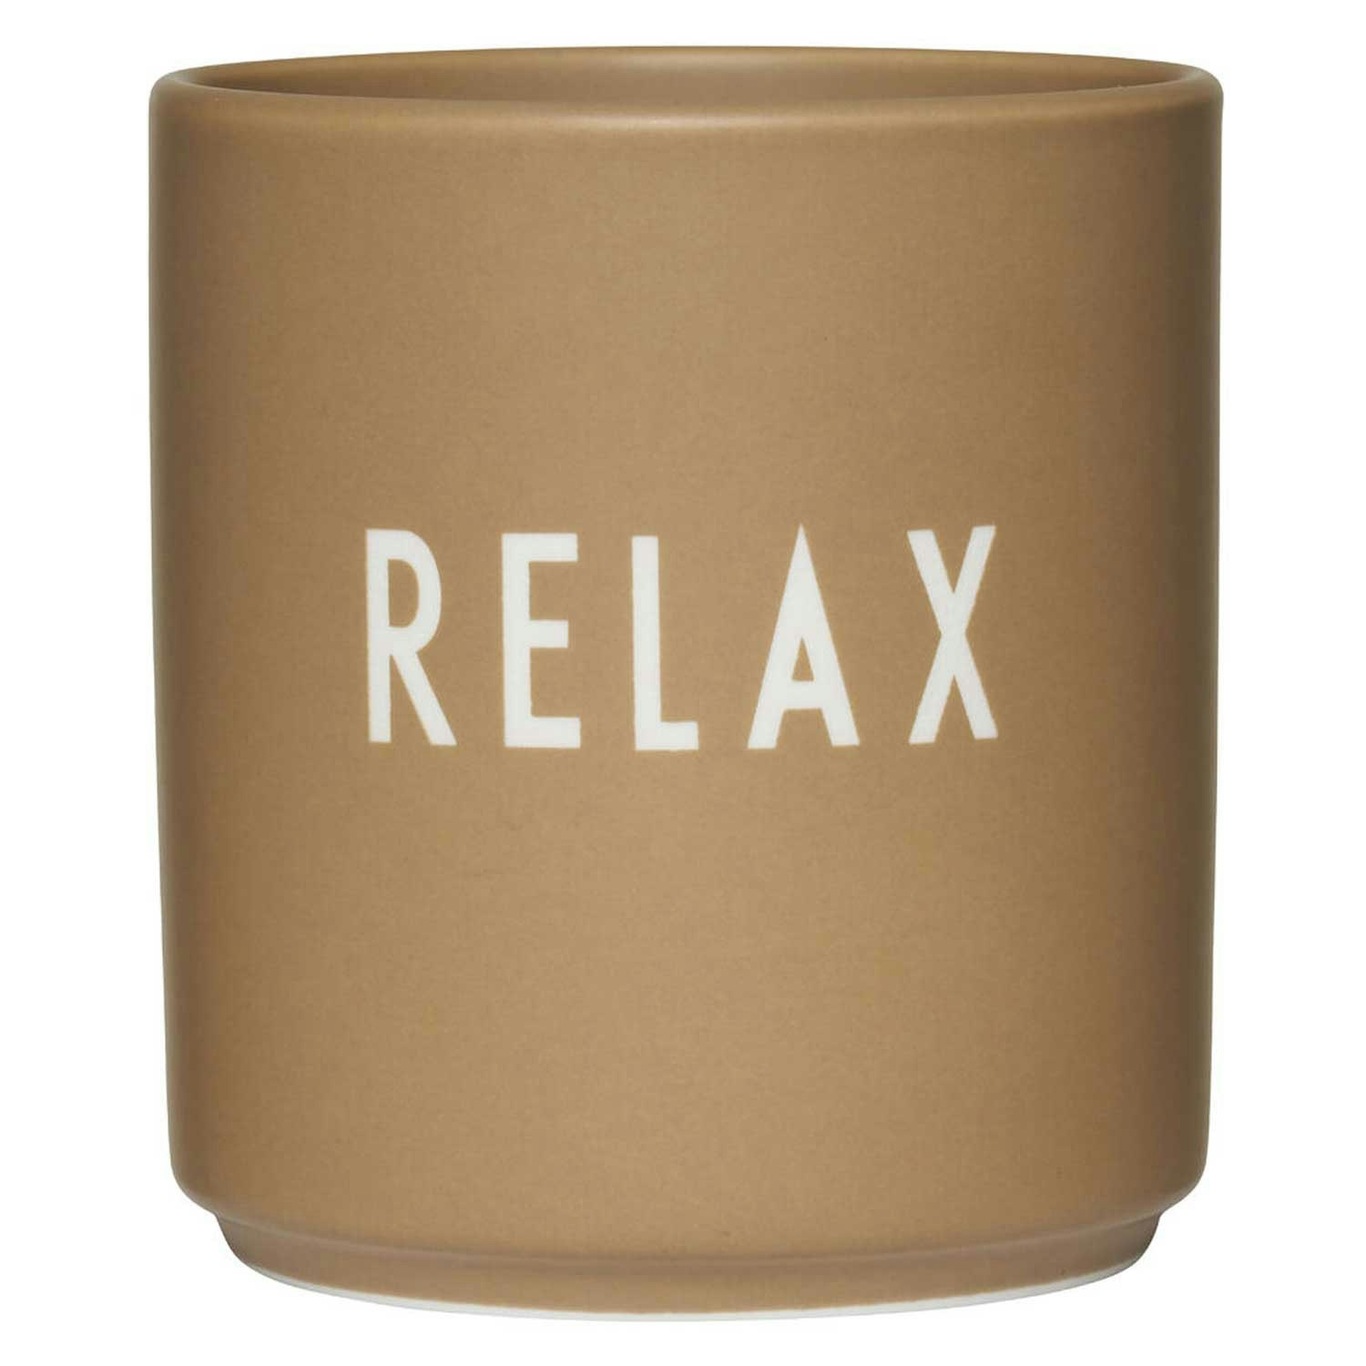 Favorite Tasse 25 cl, Good Life Collection, Relax